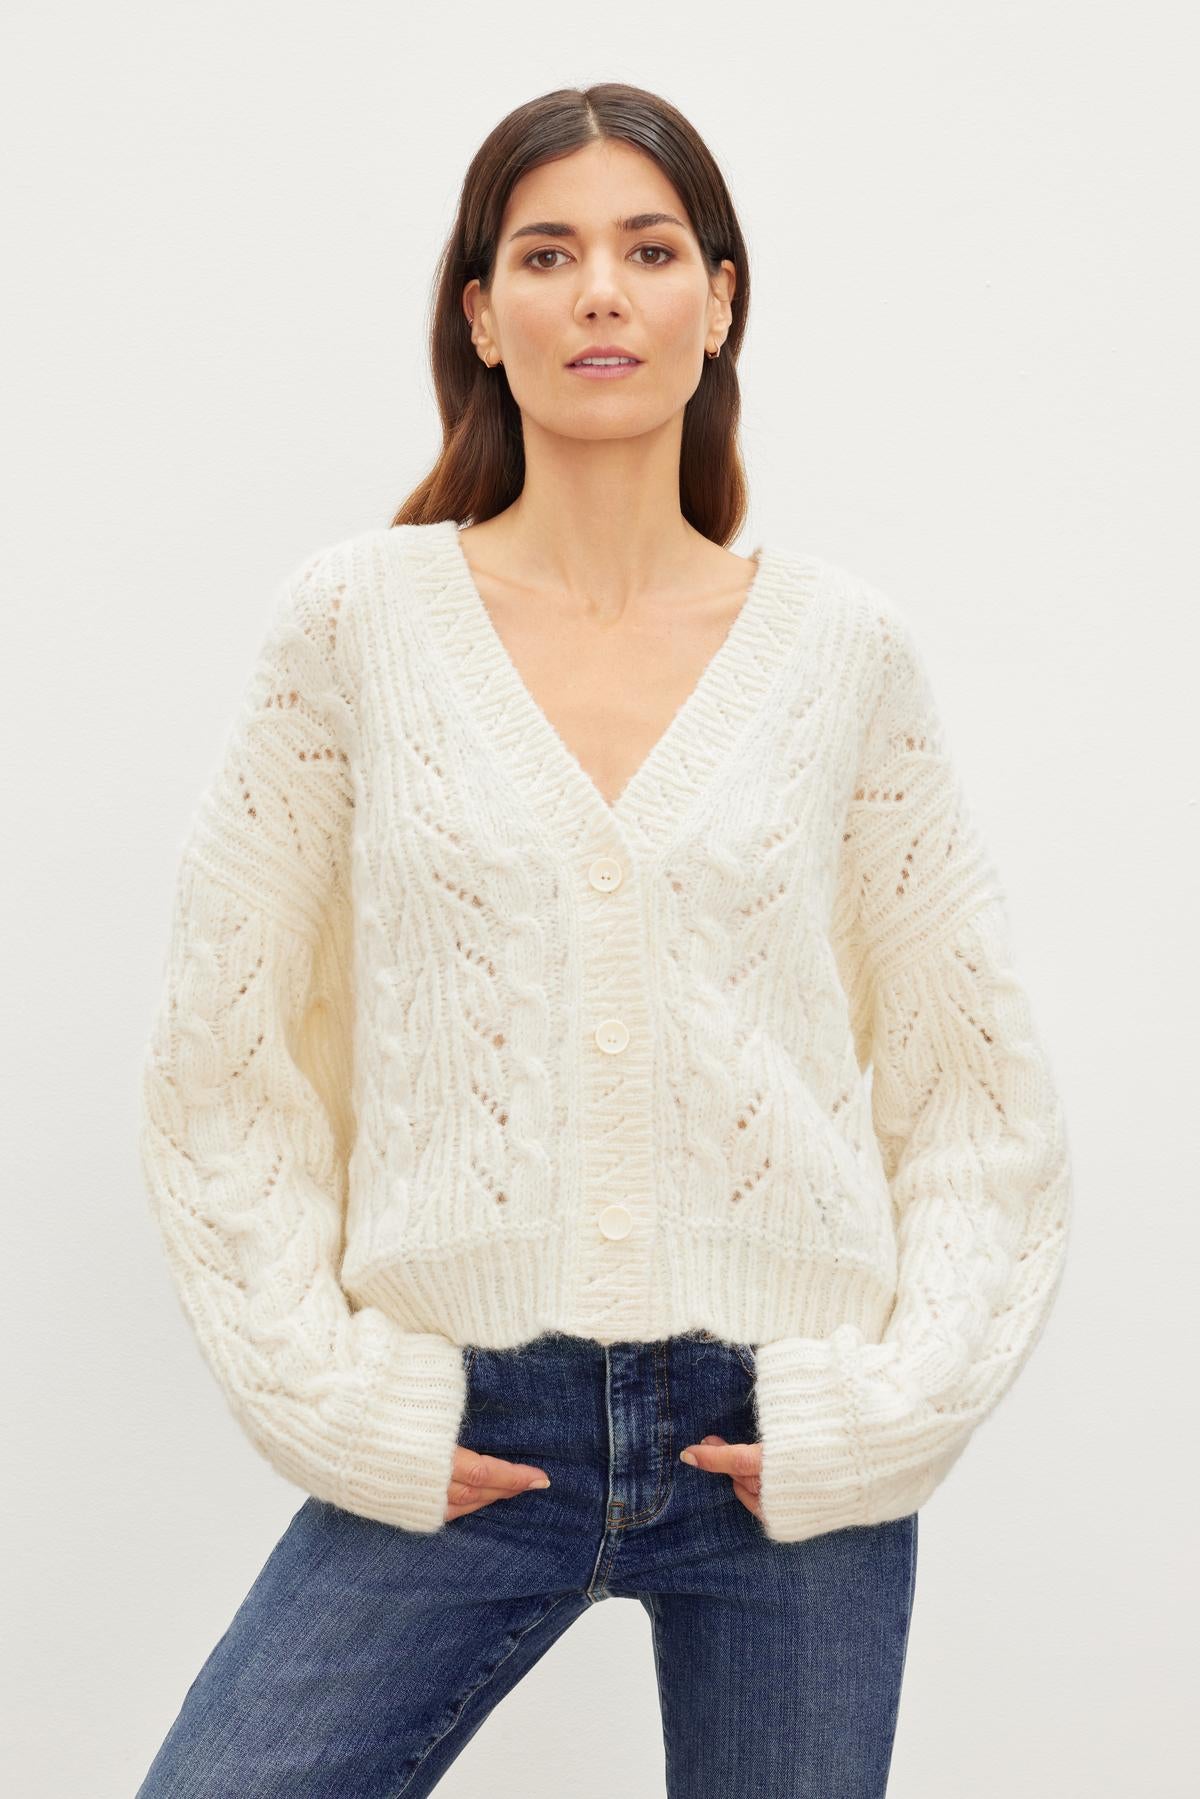 The model is wearing the Velvet by Graham & Spencer ELISA ALPACA BLEND CARDIGAN, a versatile white cable knit sweater with a relaxed fit, paired with jeans.-35655310049473